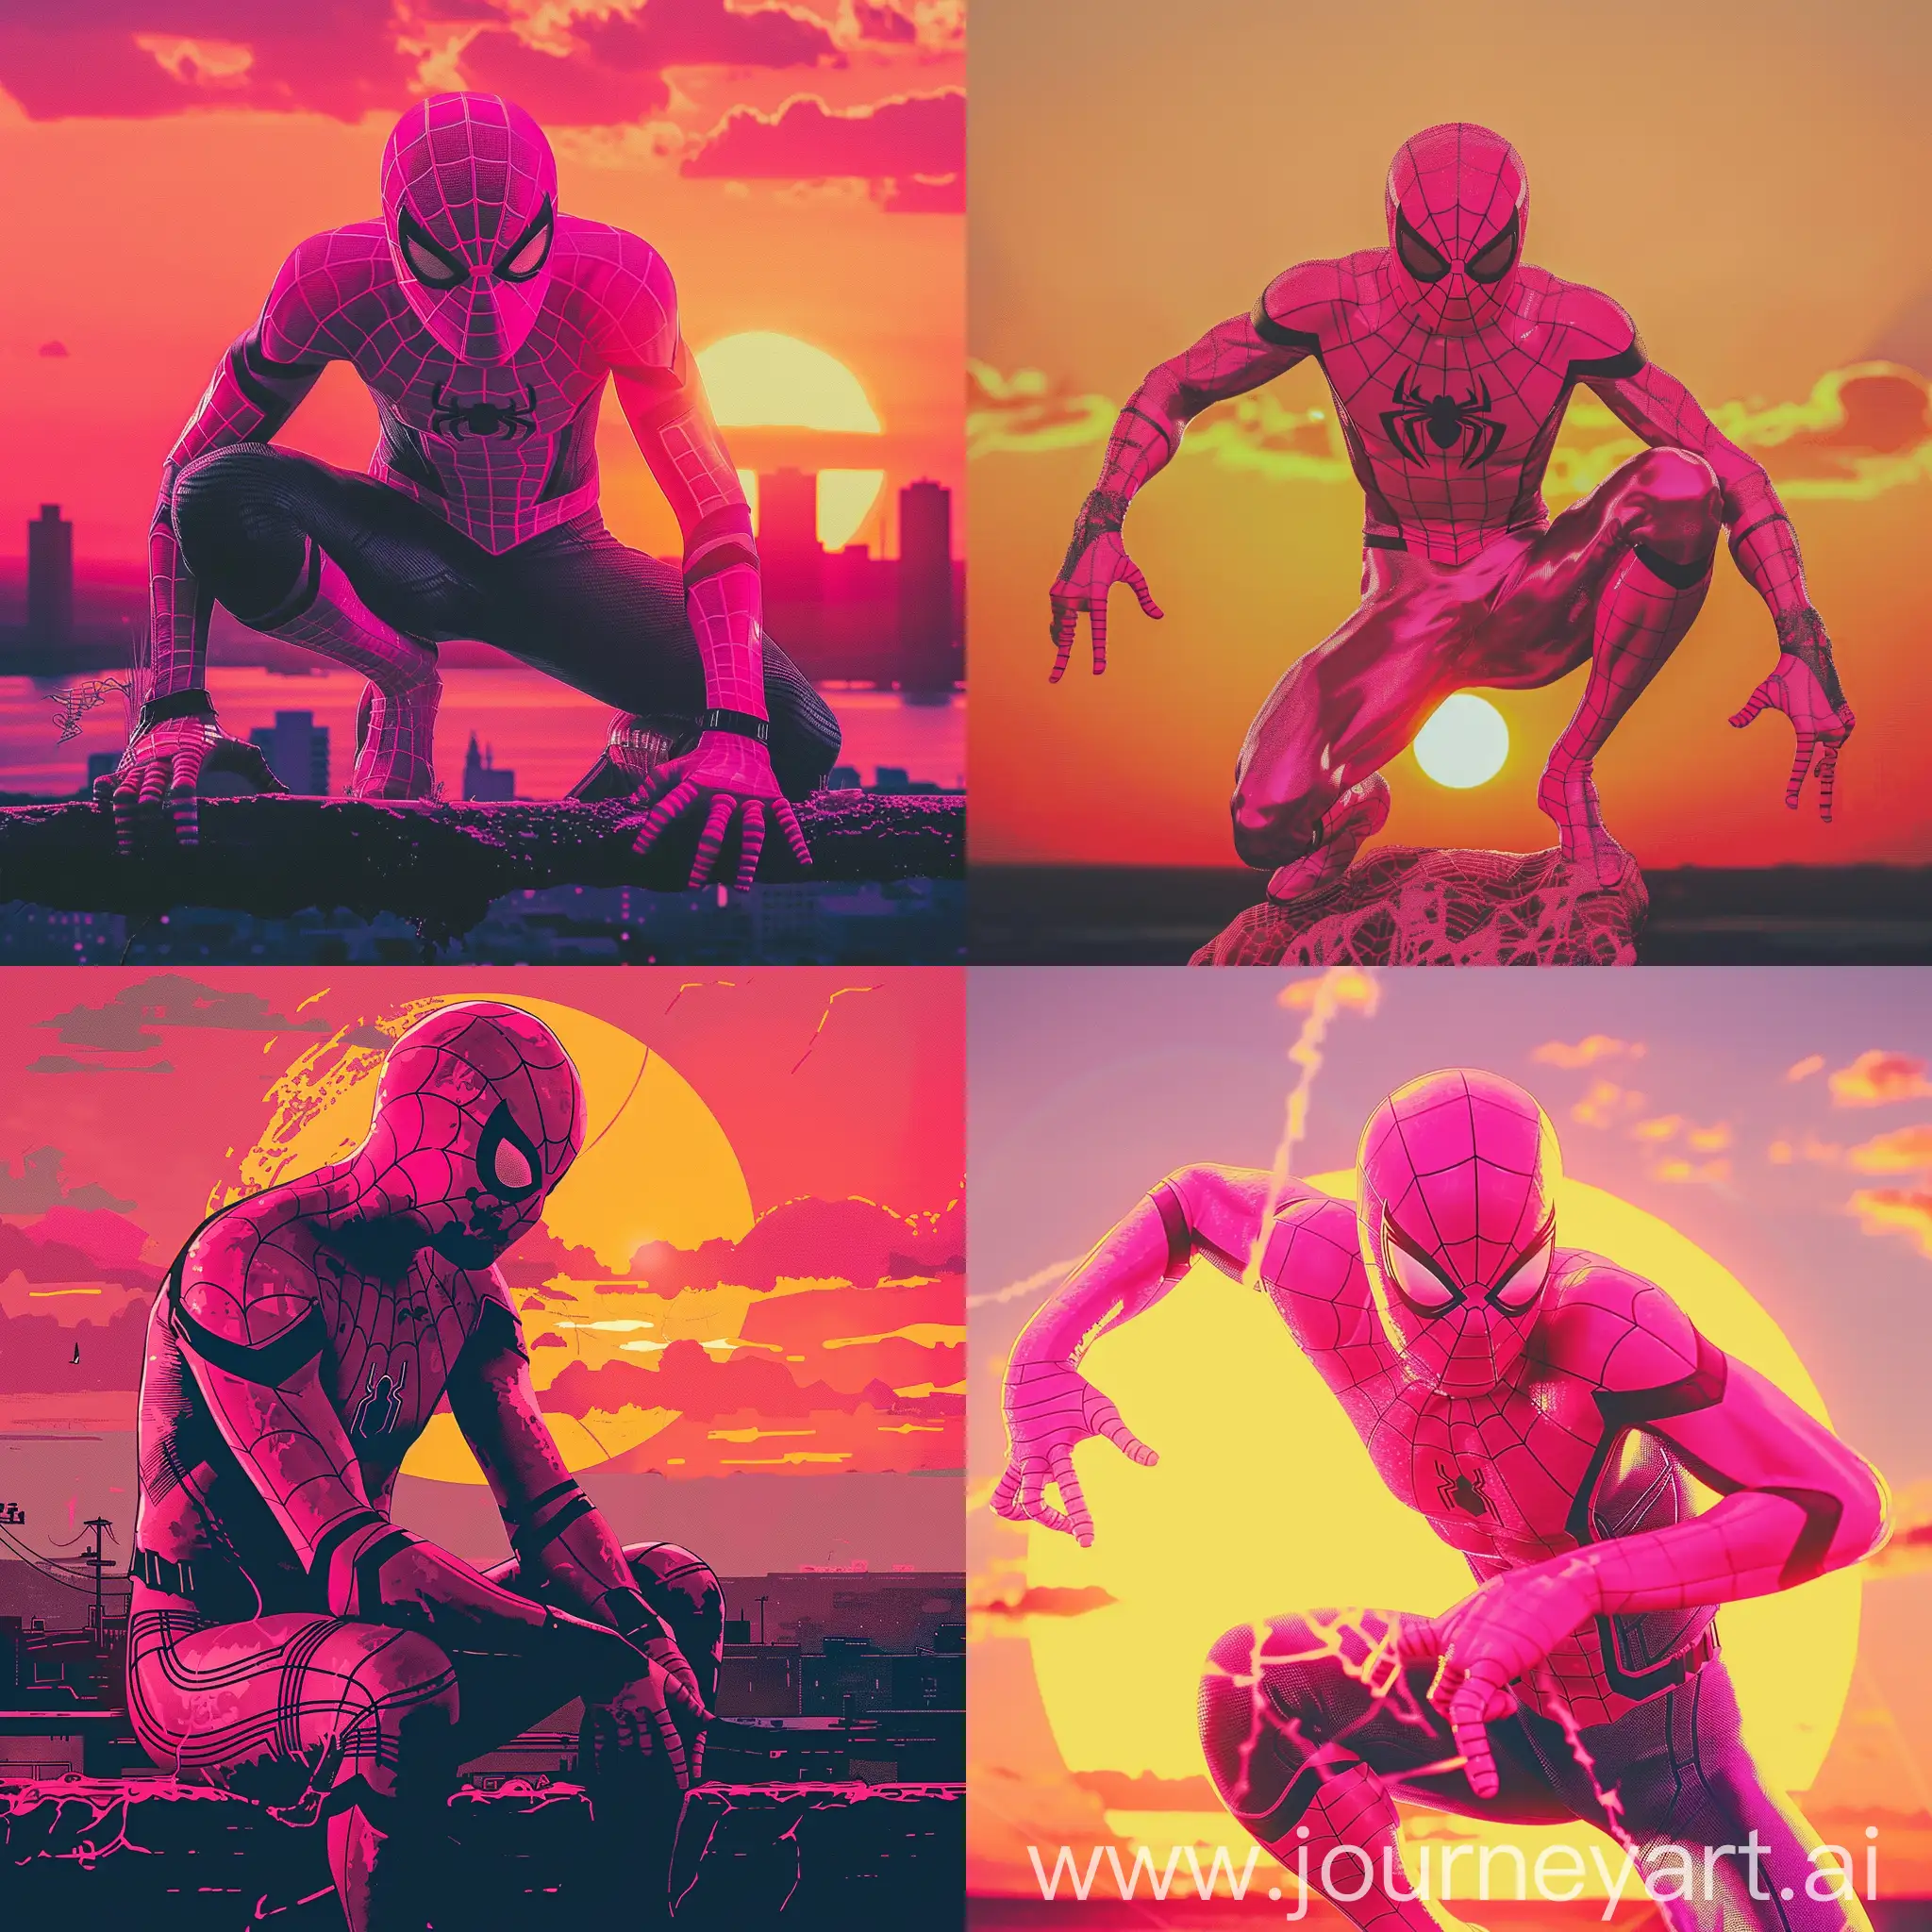 Pink-Spiderman-at-Sunset-Heroic-Silhouette-in-Vibrant-Twilight